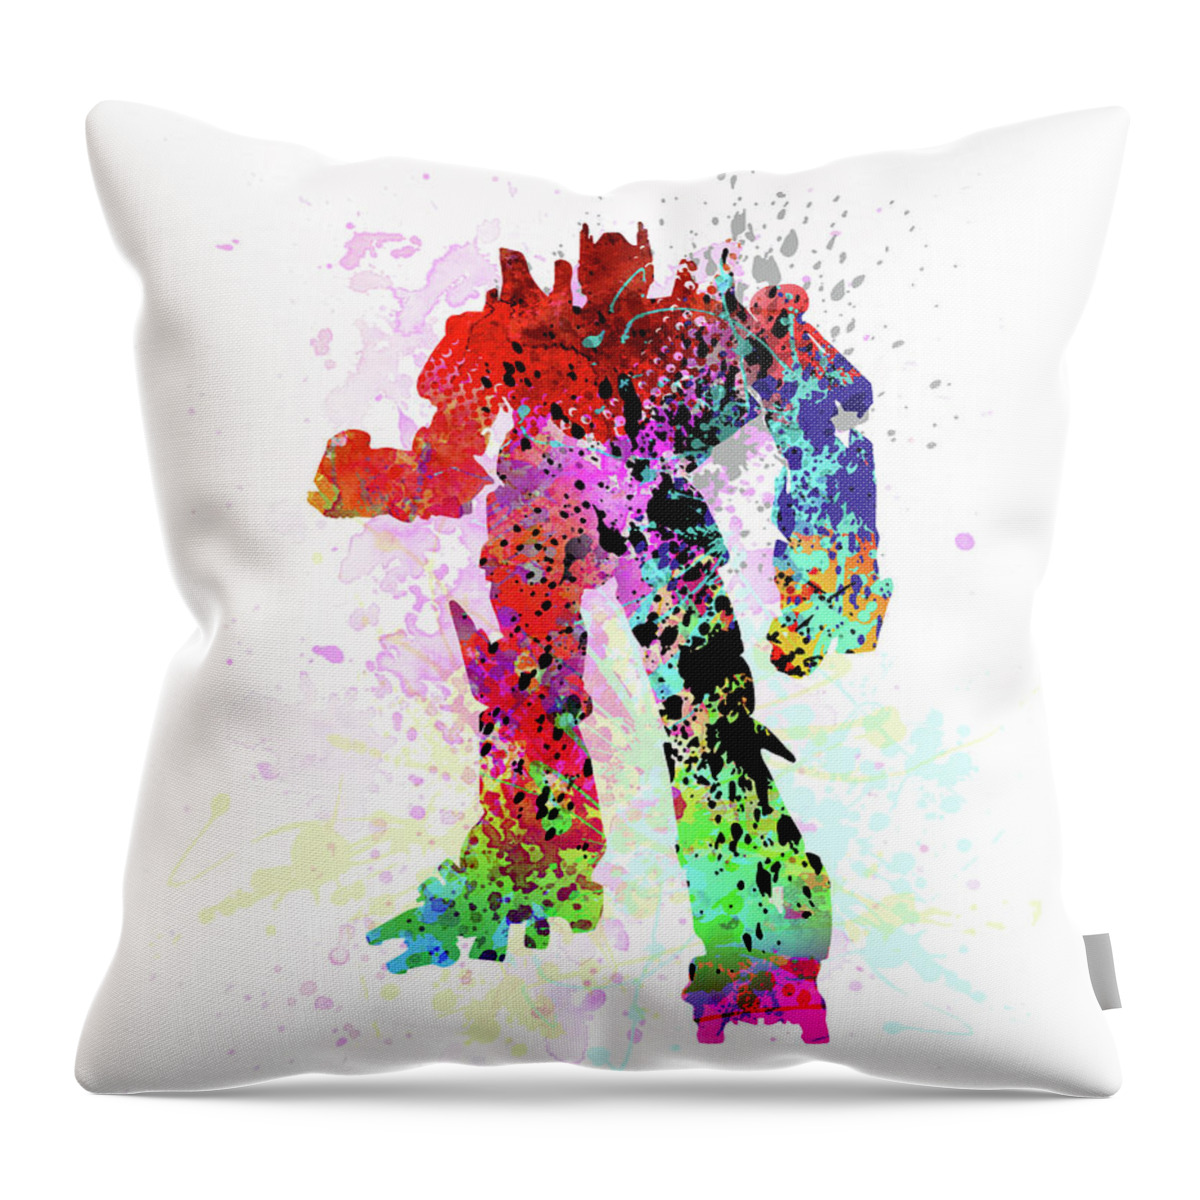 Art Print Throw Pillow featuring the painting Transformers by Art Popop